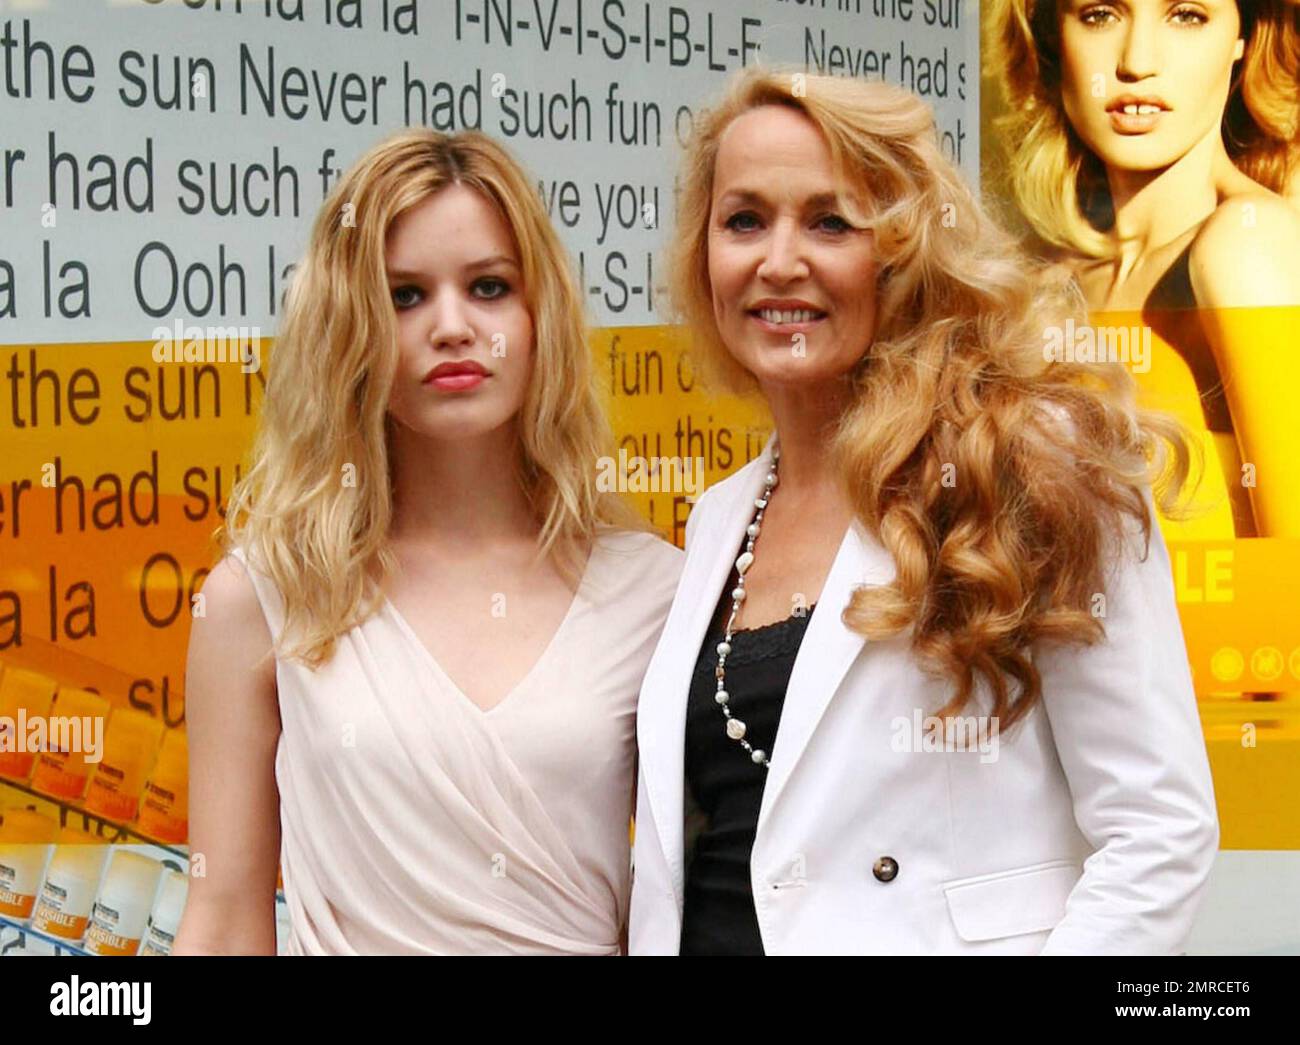 Jerry Hall, 53, American model and former long-time girlfriend to The Rolling Stones frontman Mick Jagger, and their third child Georgia May Jagger, 18, pose during a photo call at Selfridges department store for the launch of Invisible Zinc range of sun care and hybrid cosmetic-sunscreen products. London, UK. 05/27/10. Stock Photo